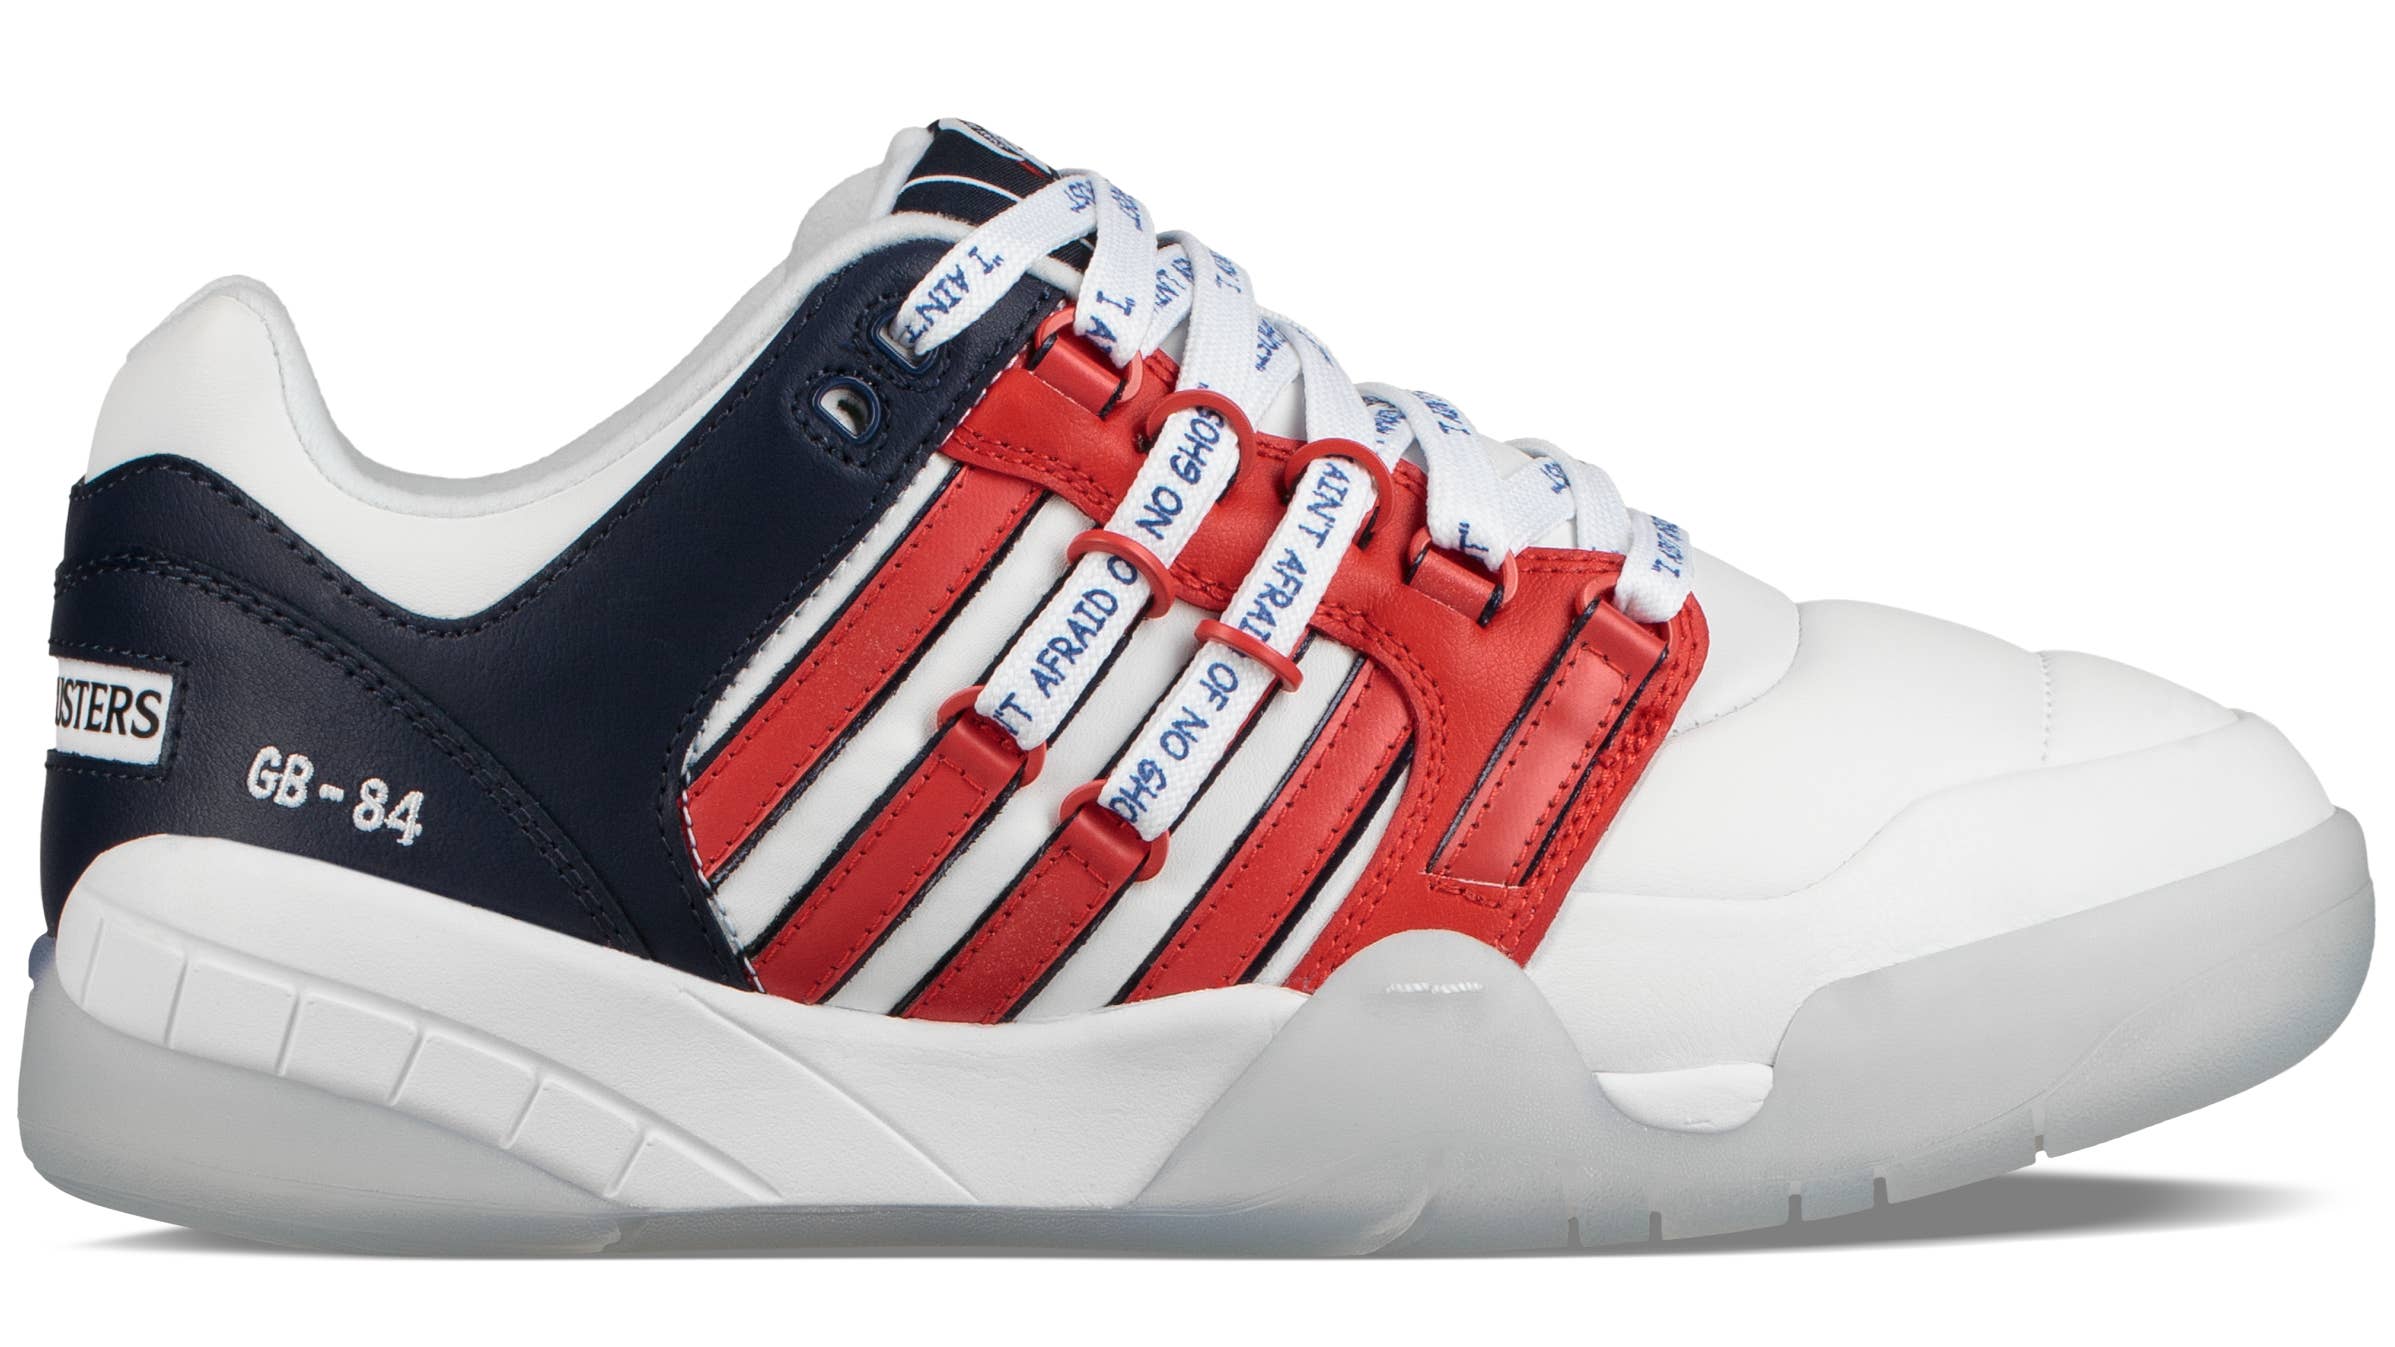 K Swiss x Ghostbusters Si 18 International 'Stay Puft' 06620 104 (Lateral)